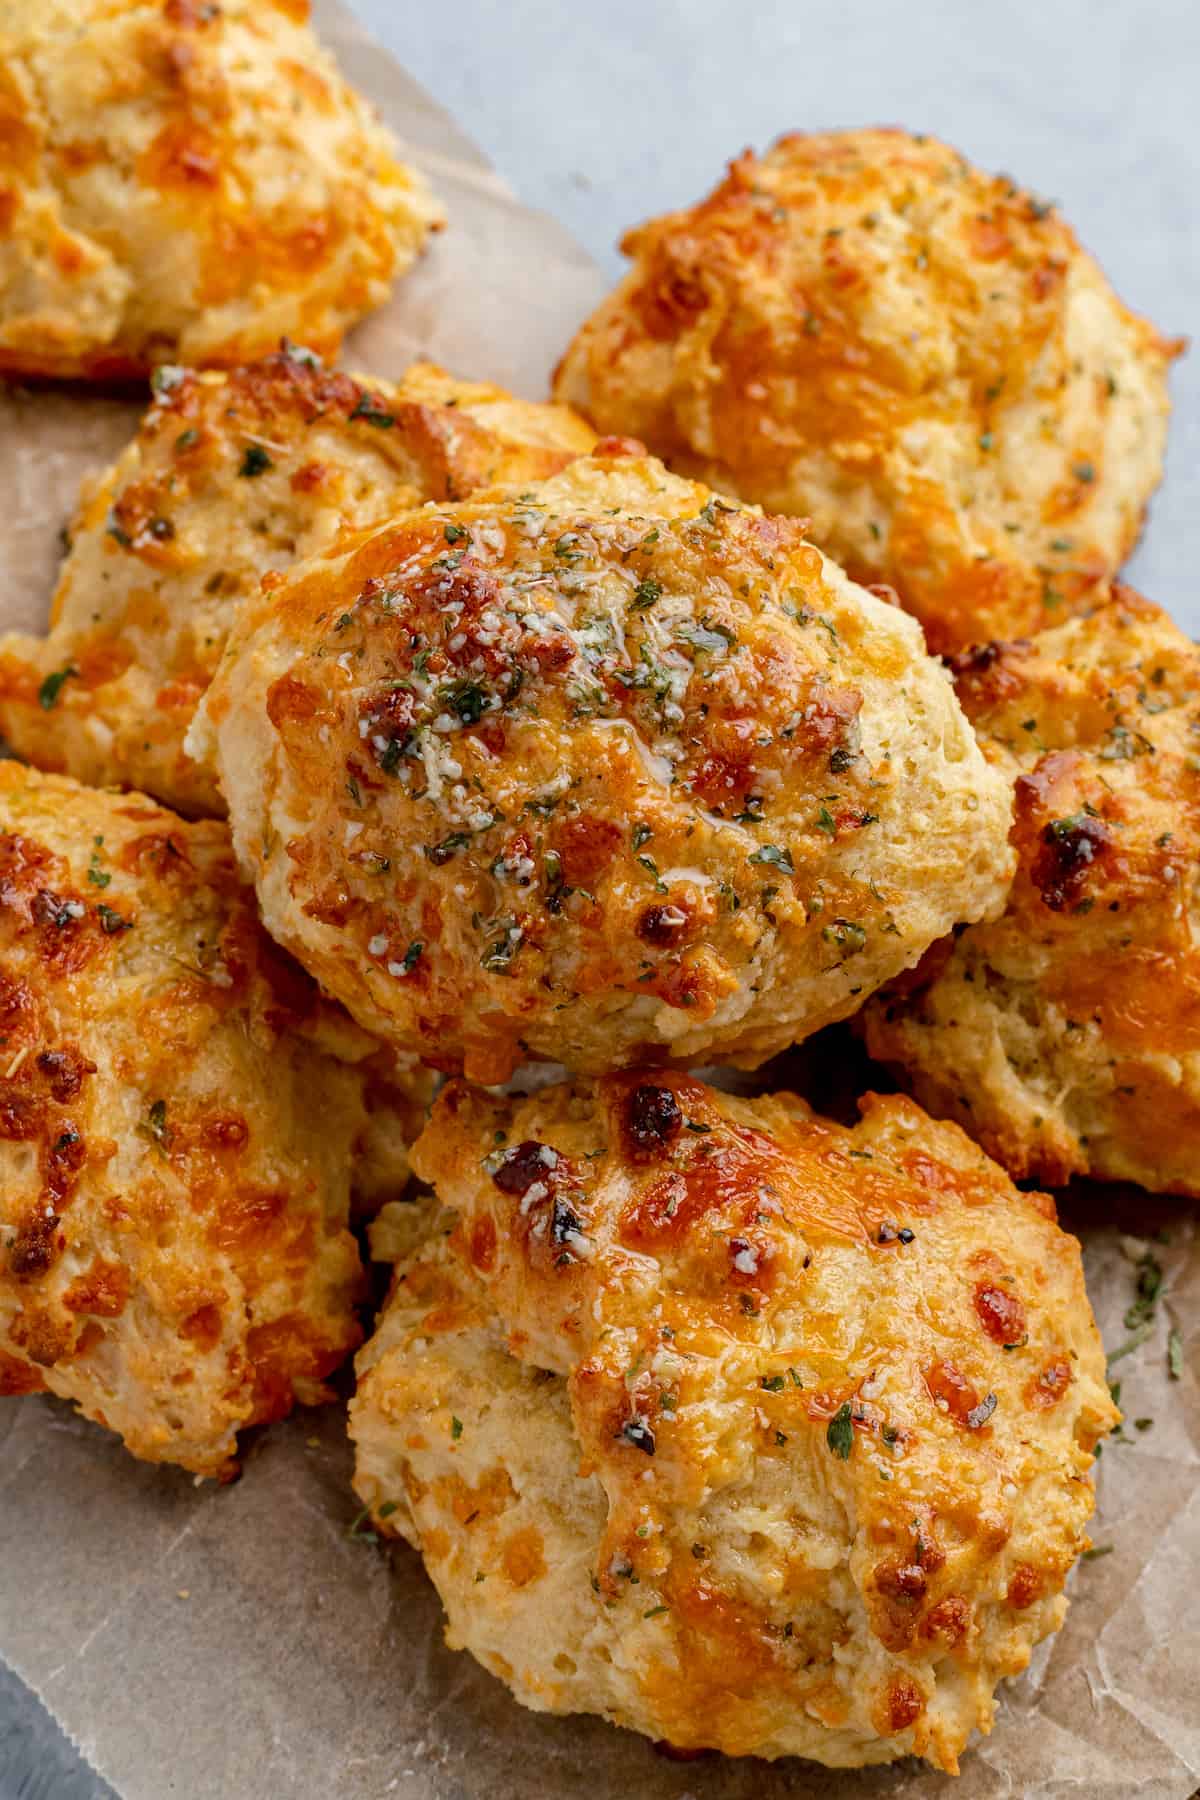 A Bird's Eye View of a Pile of Red Lobster Biscuits